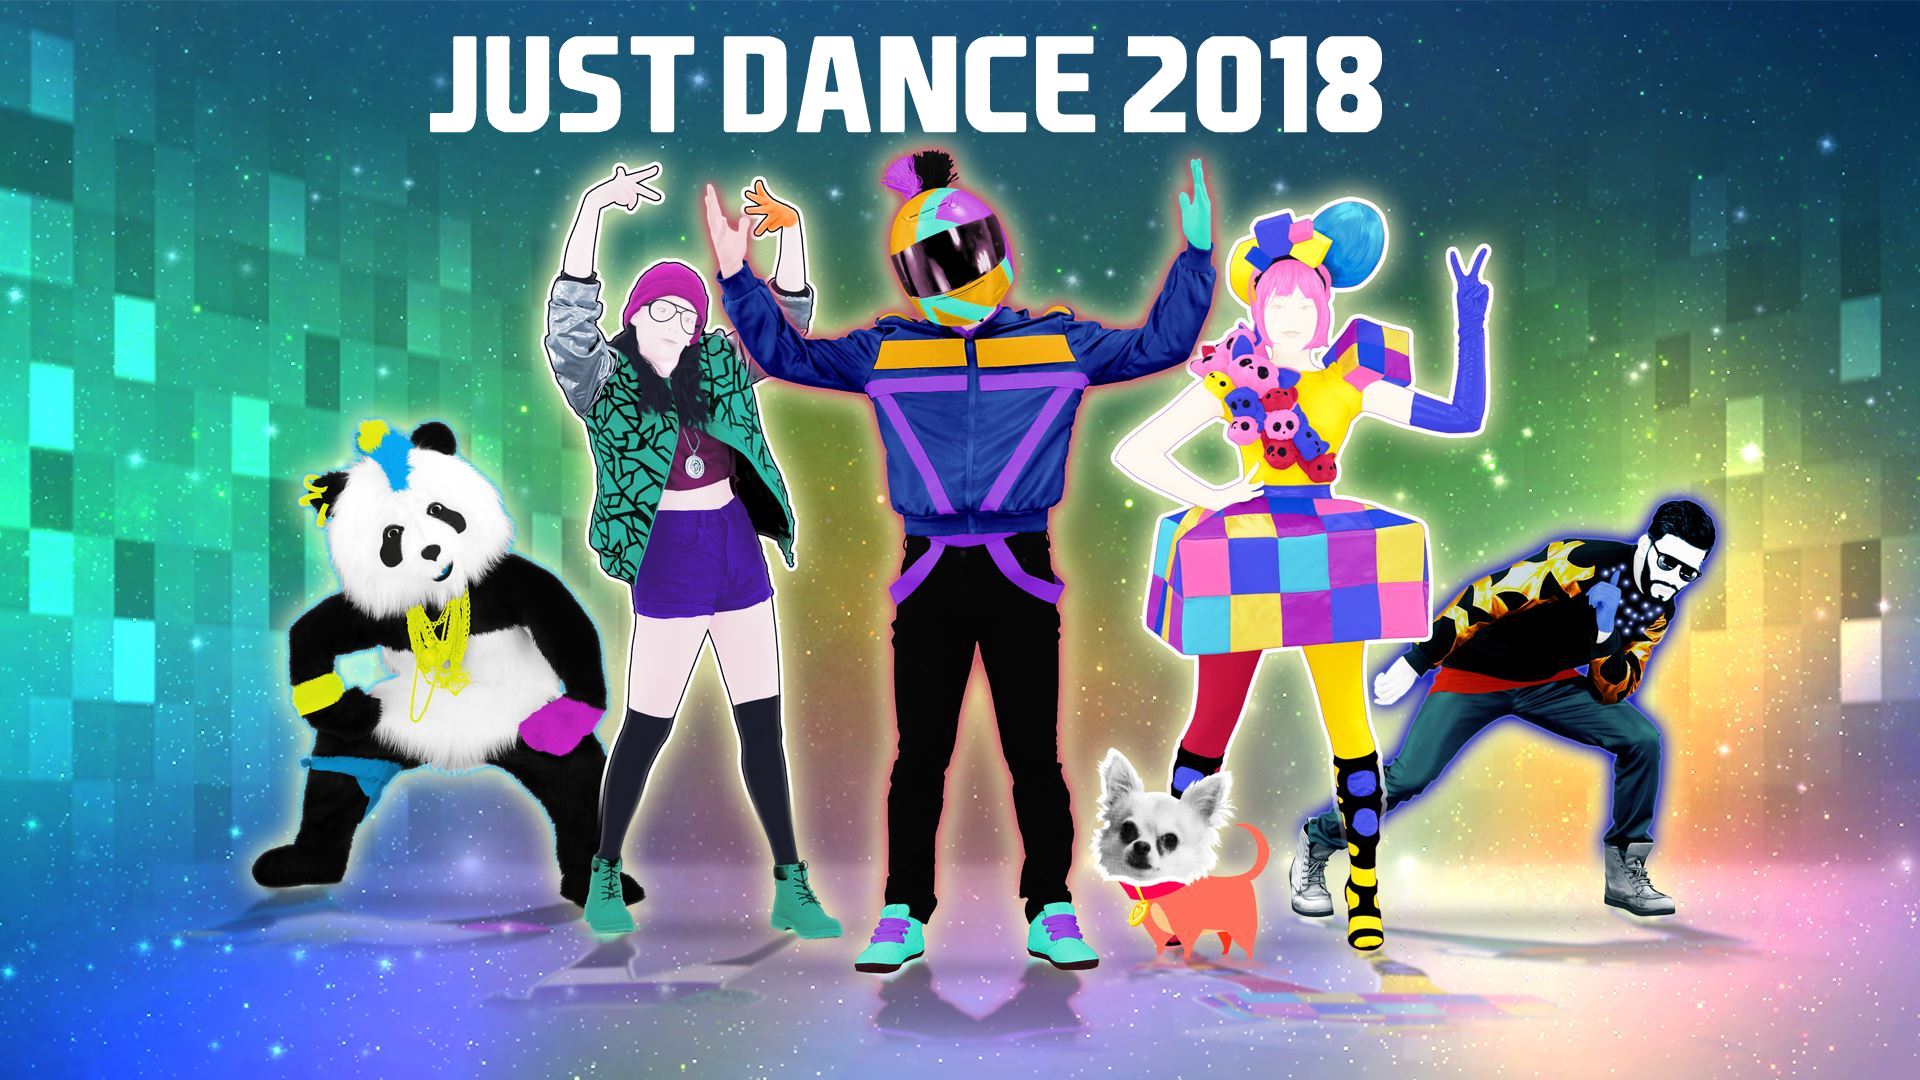 Just Dance 2018 announced